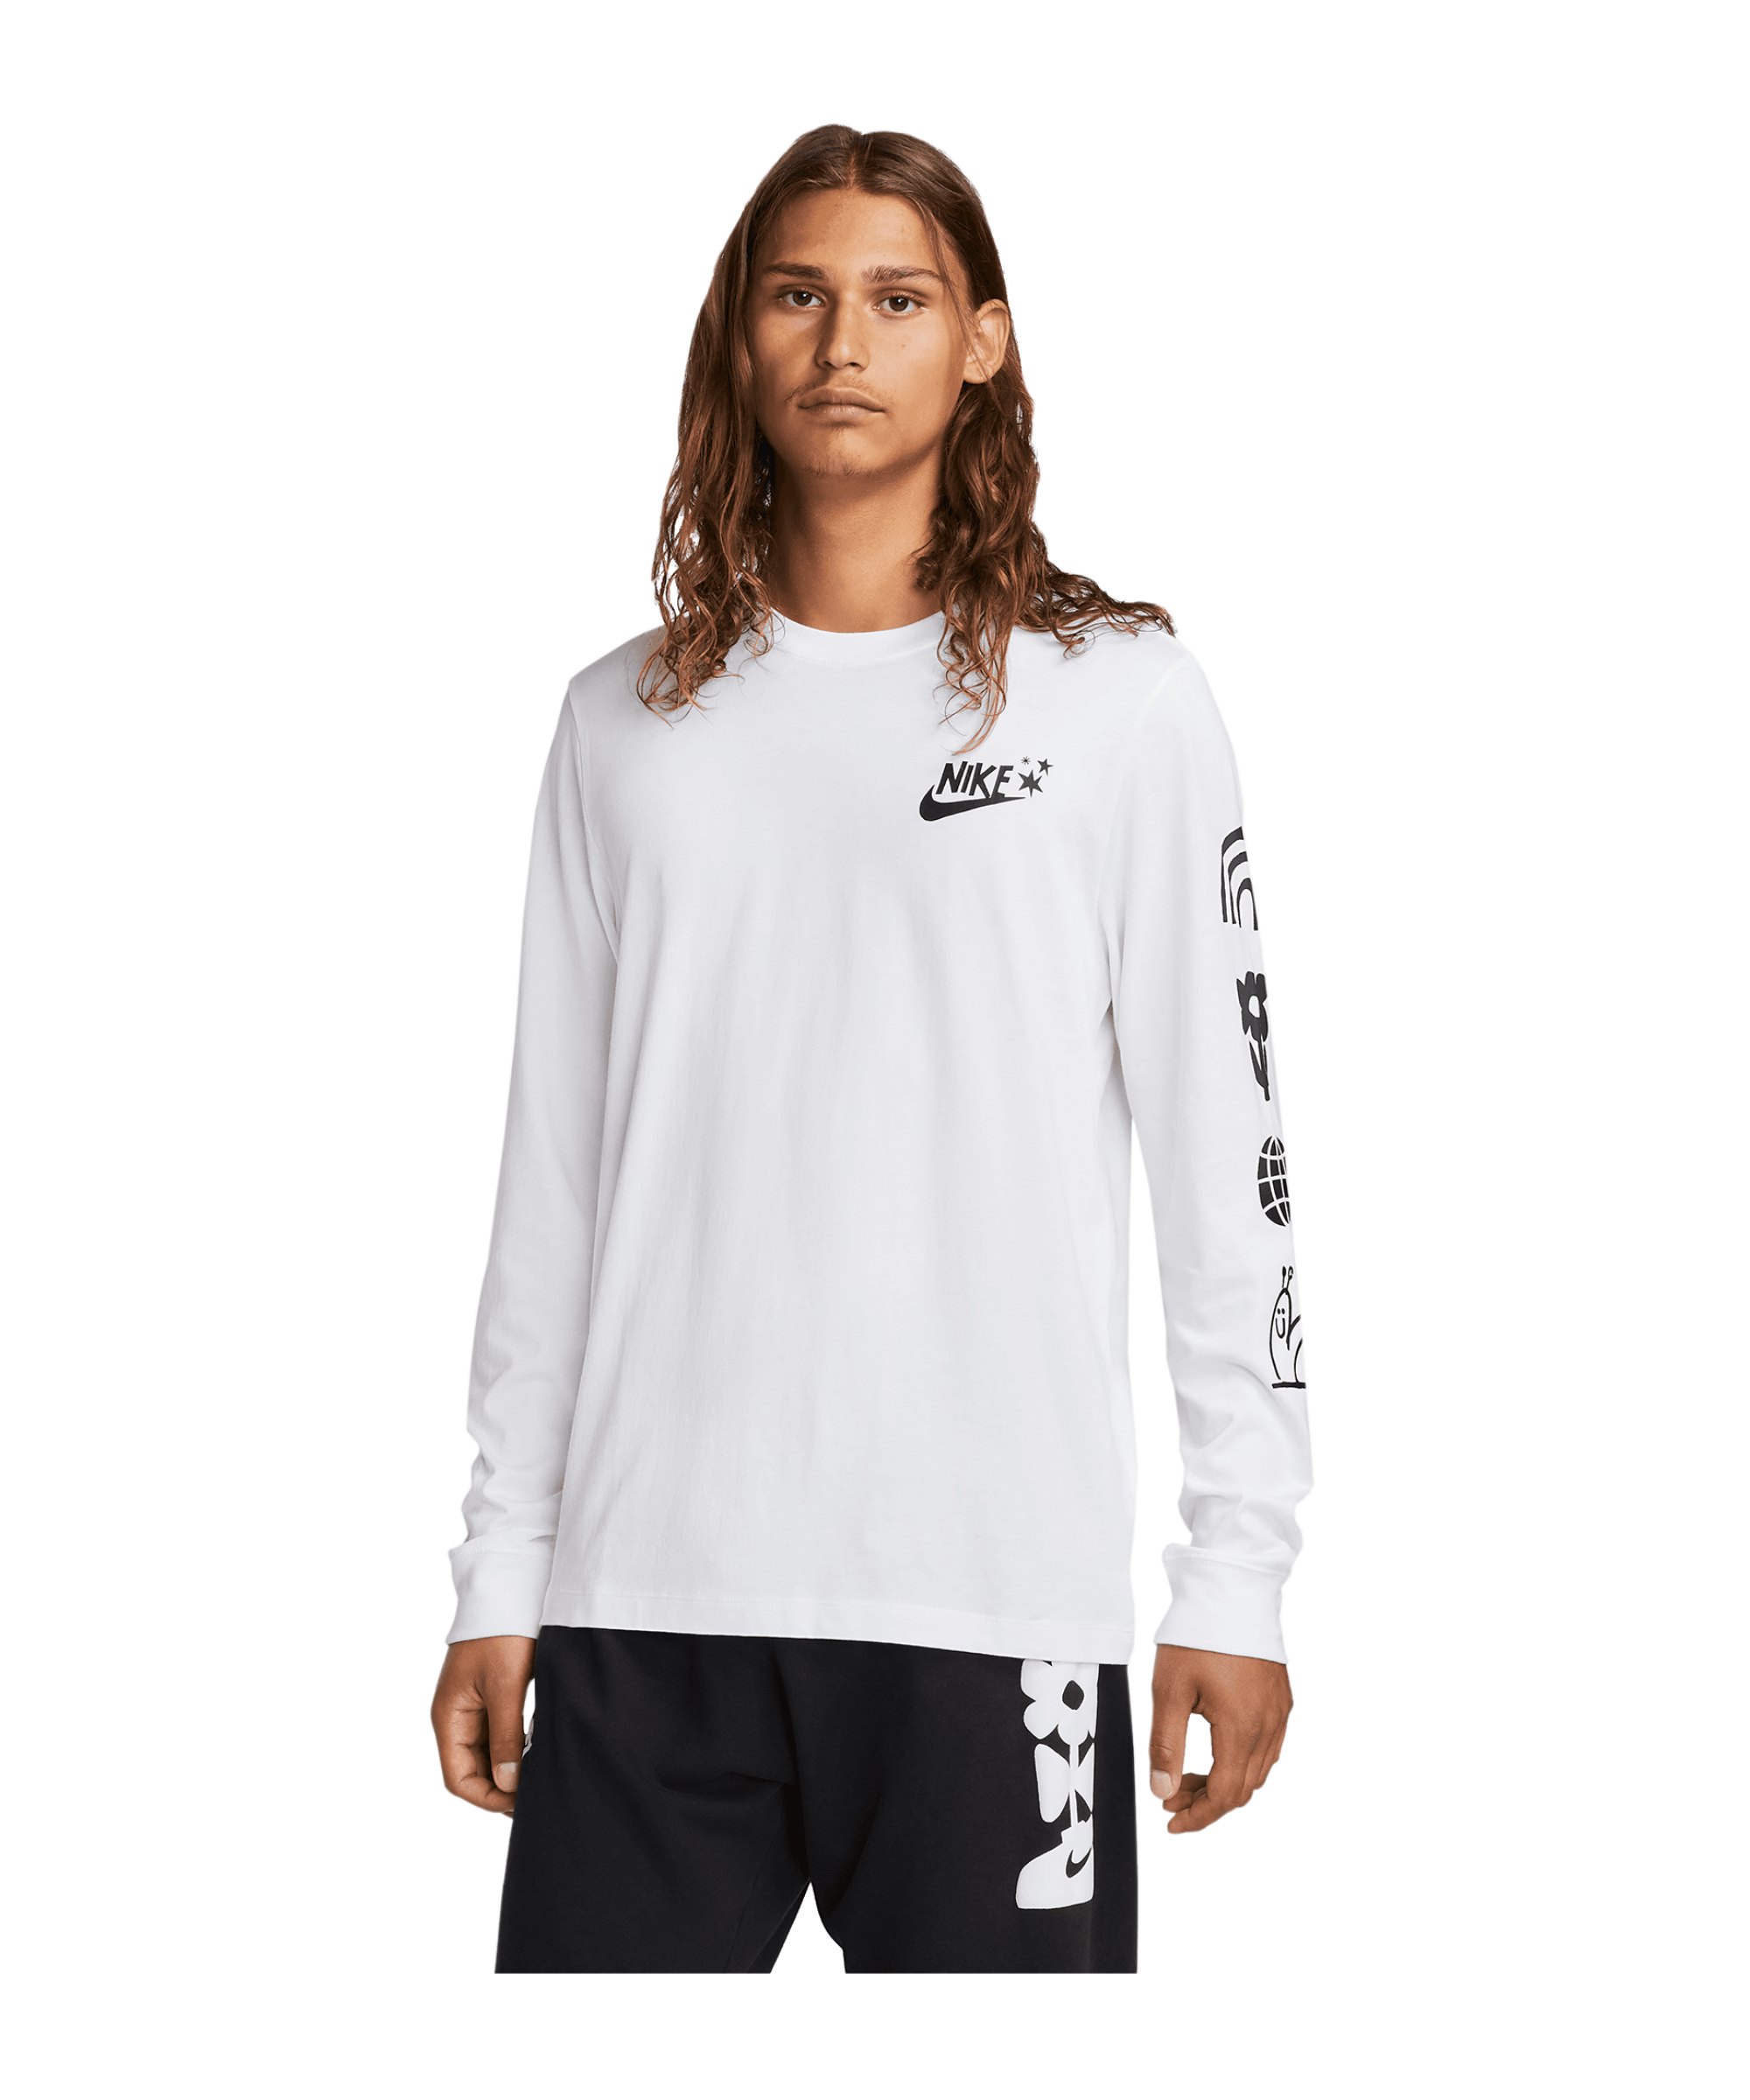 Nike Have A Day Print Sweatshirt Weiss F100 - weiss